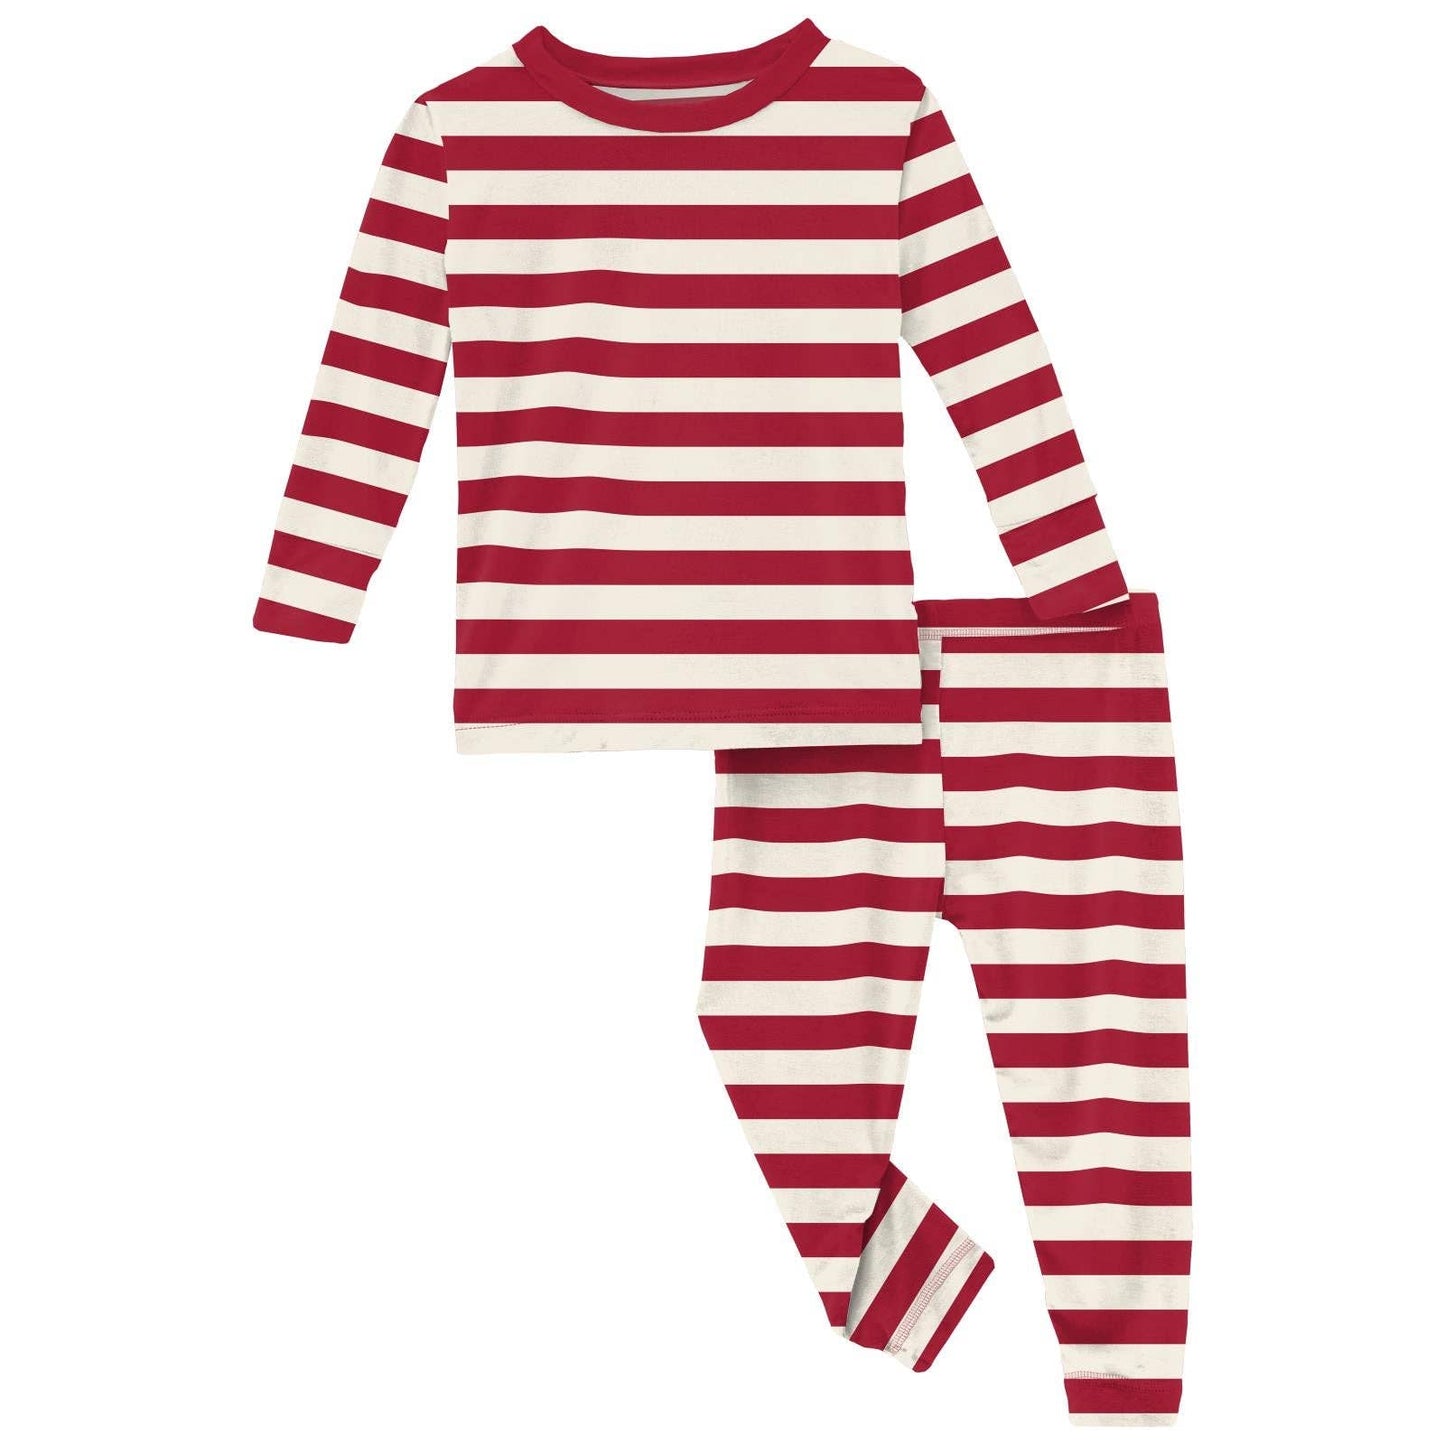 Print Long Sleeve Pajama Set in Classic Candy Cane Stripe